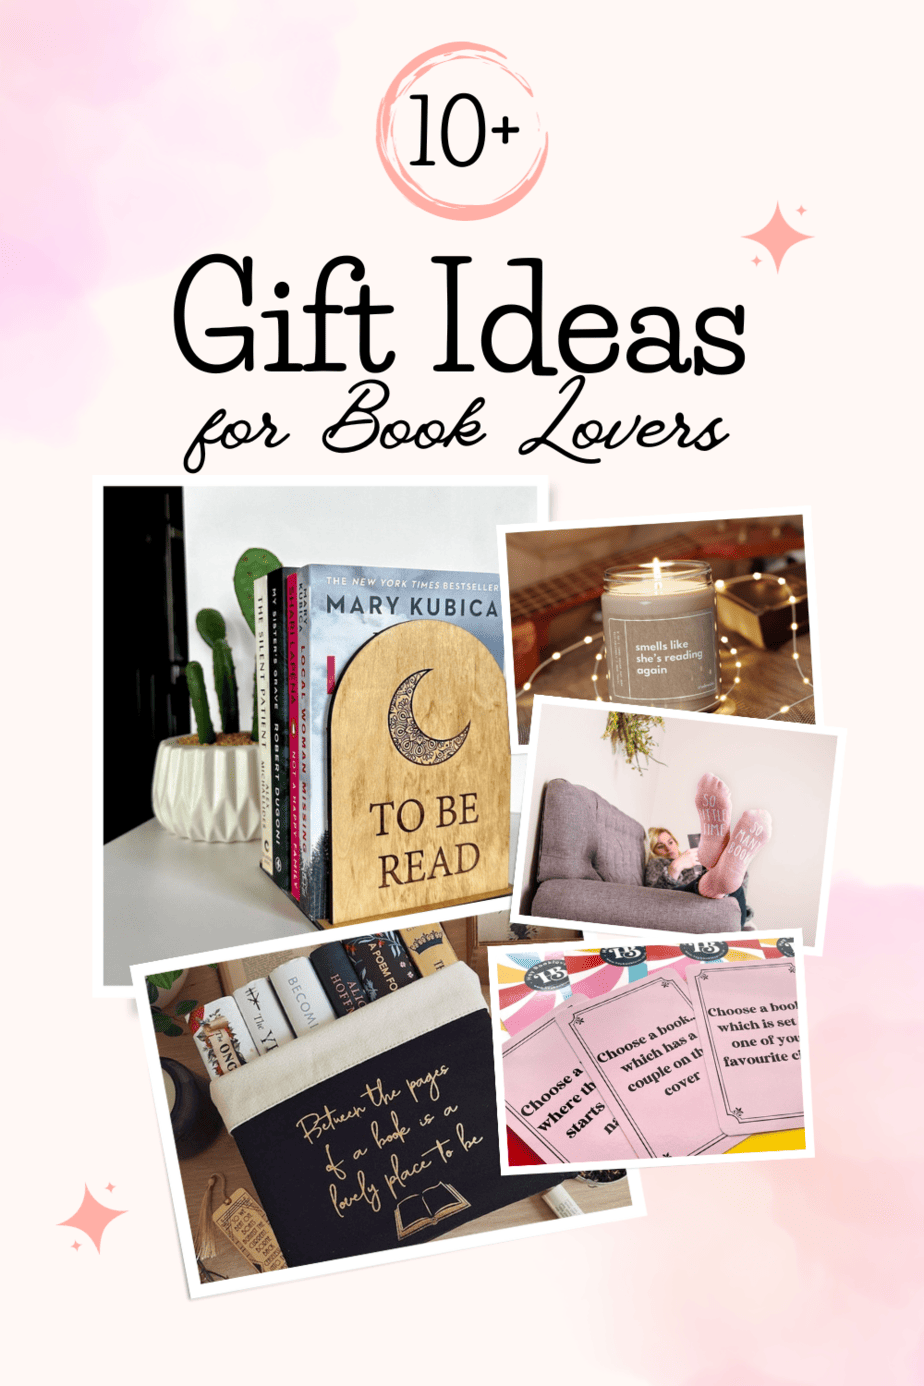 Check out our Book Lover Gift Guide filled with gift ideas for readers